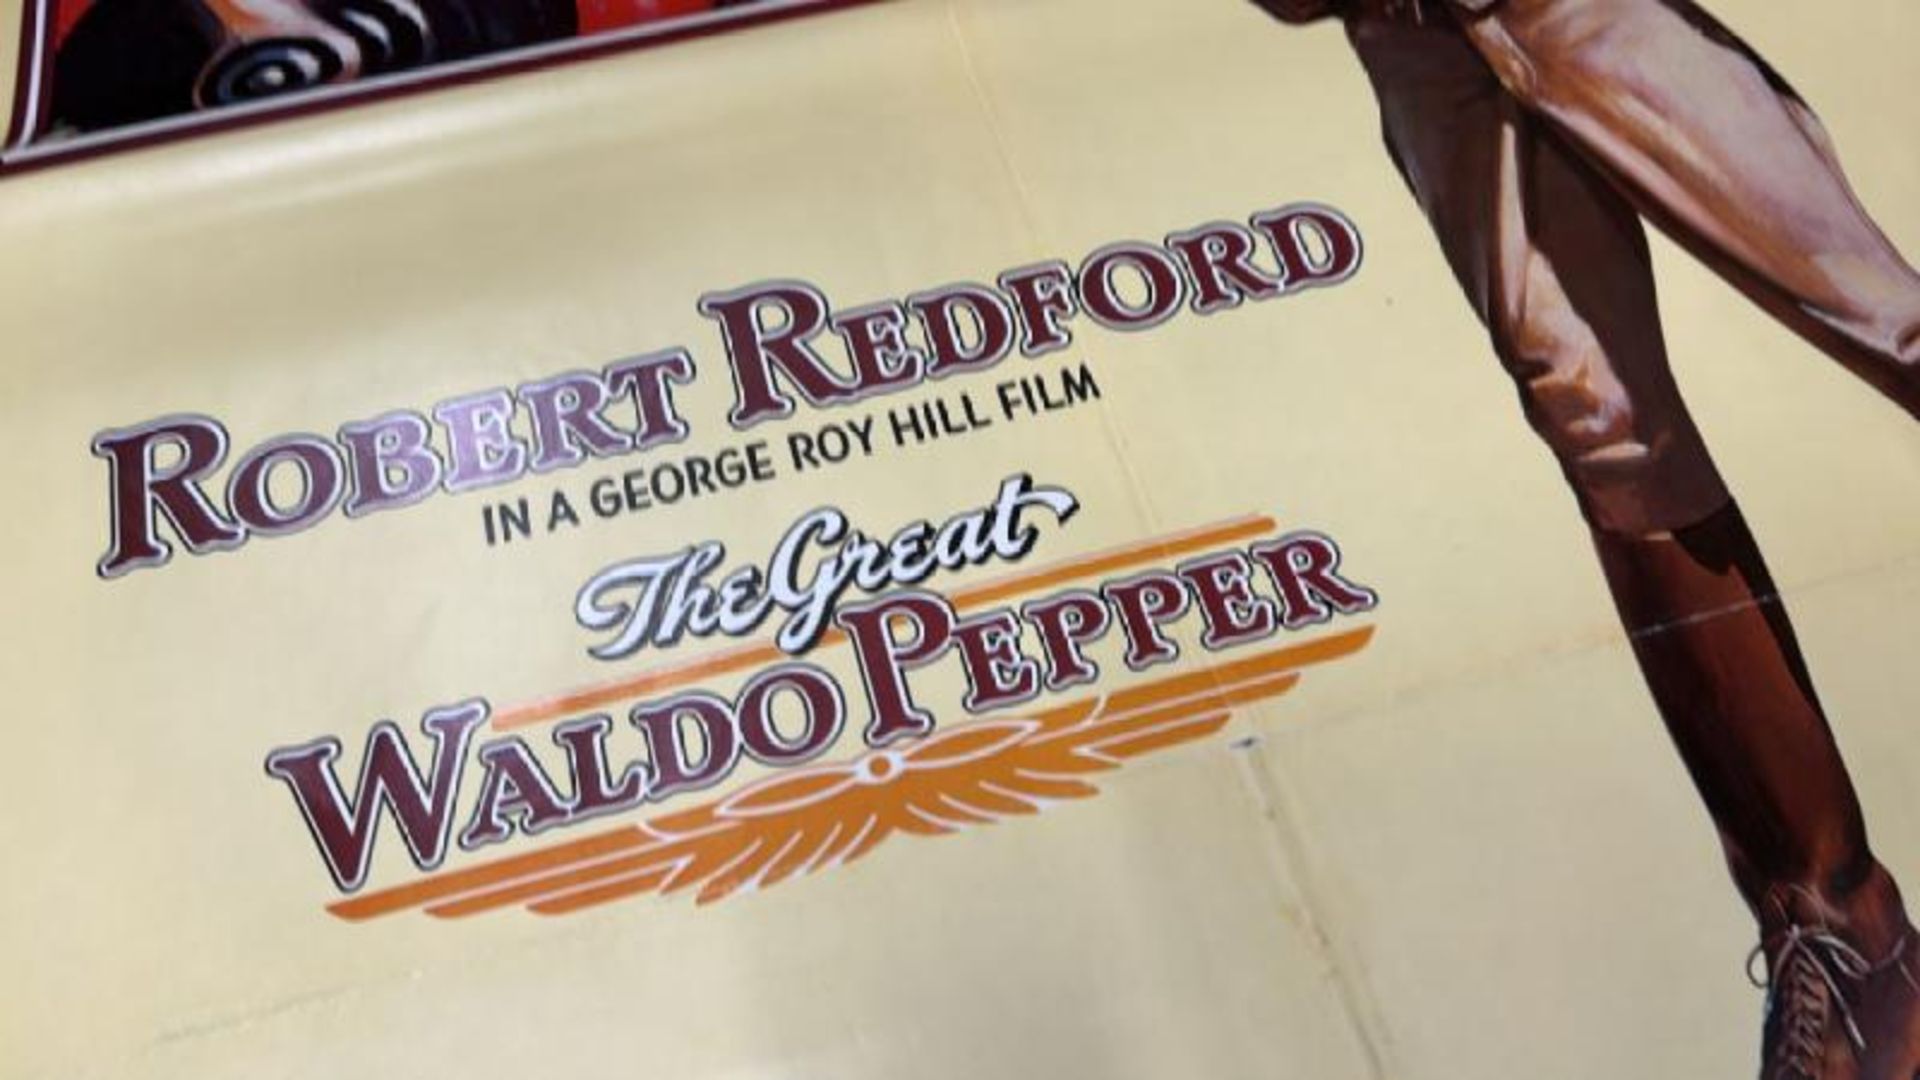 THE GREAT VALDO PEPPER, THE SECOND GREATEST FLYER IN THE WORLD STARRING ROBERT REDFORD, ORIGINAL - Image 3 of 4